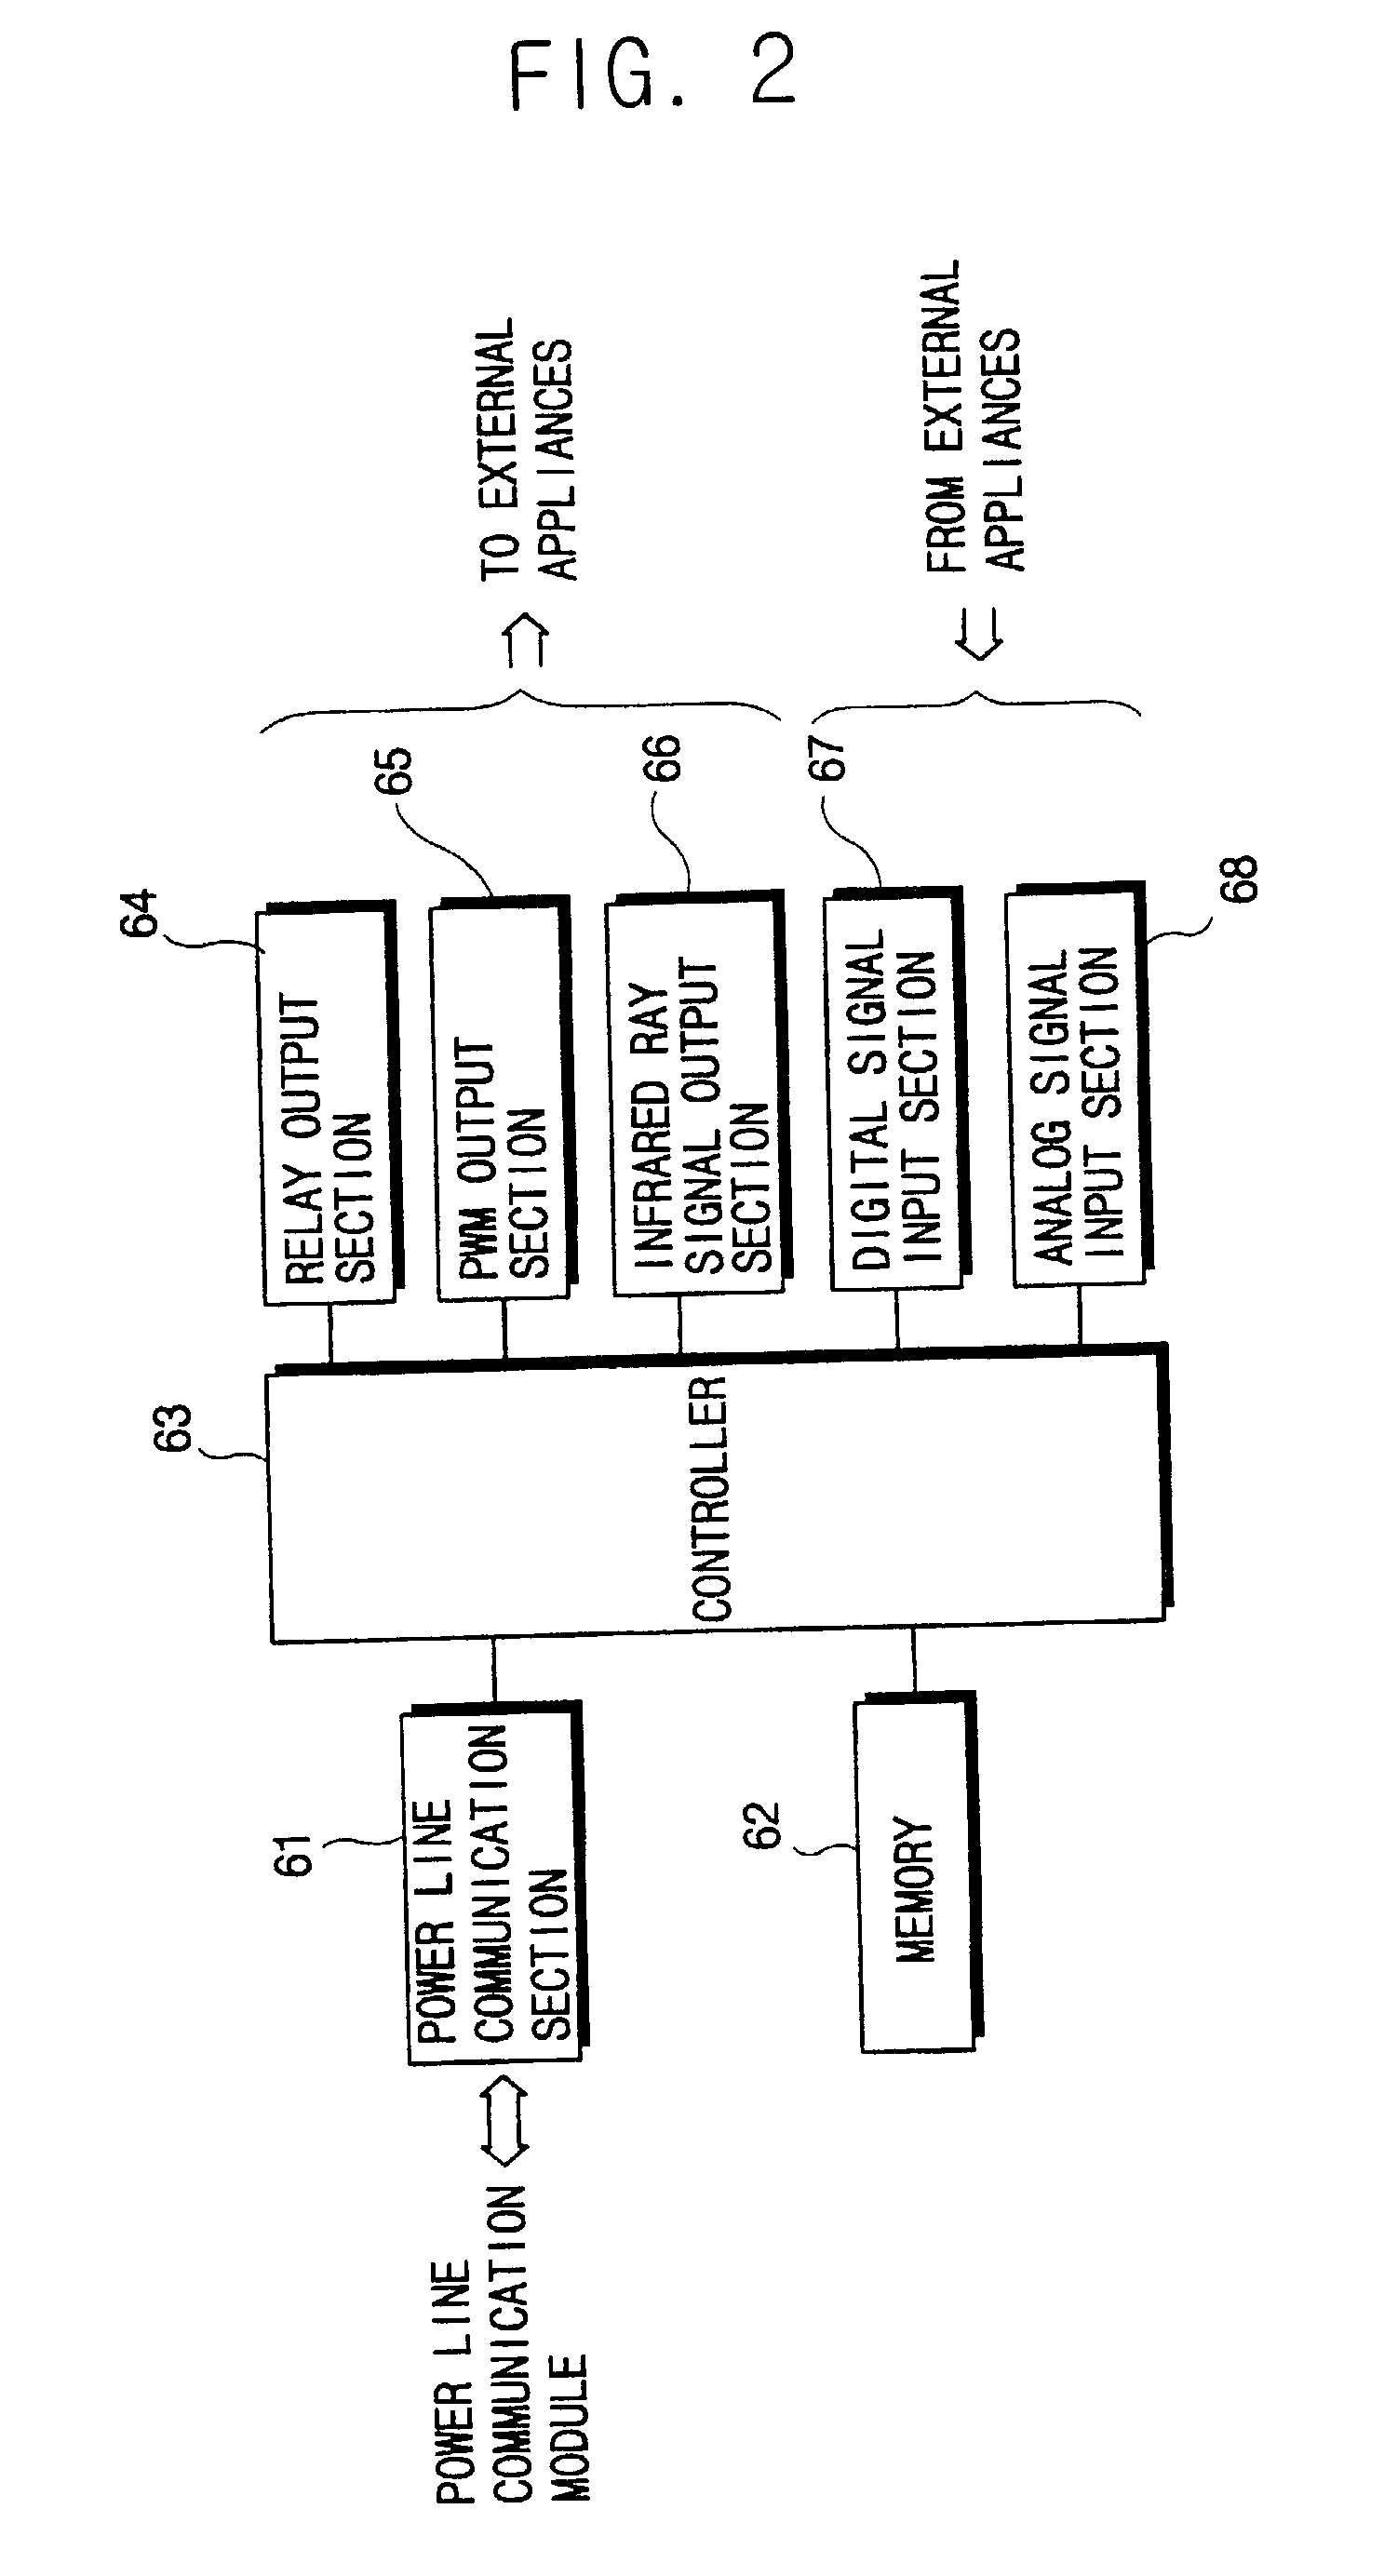 Automatic control system using power line communication method